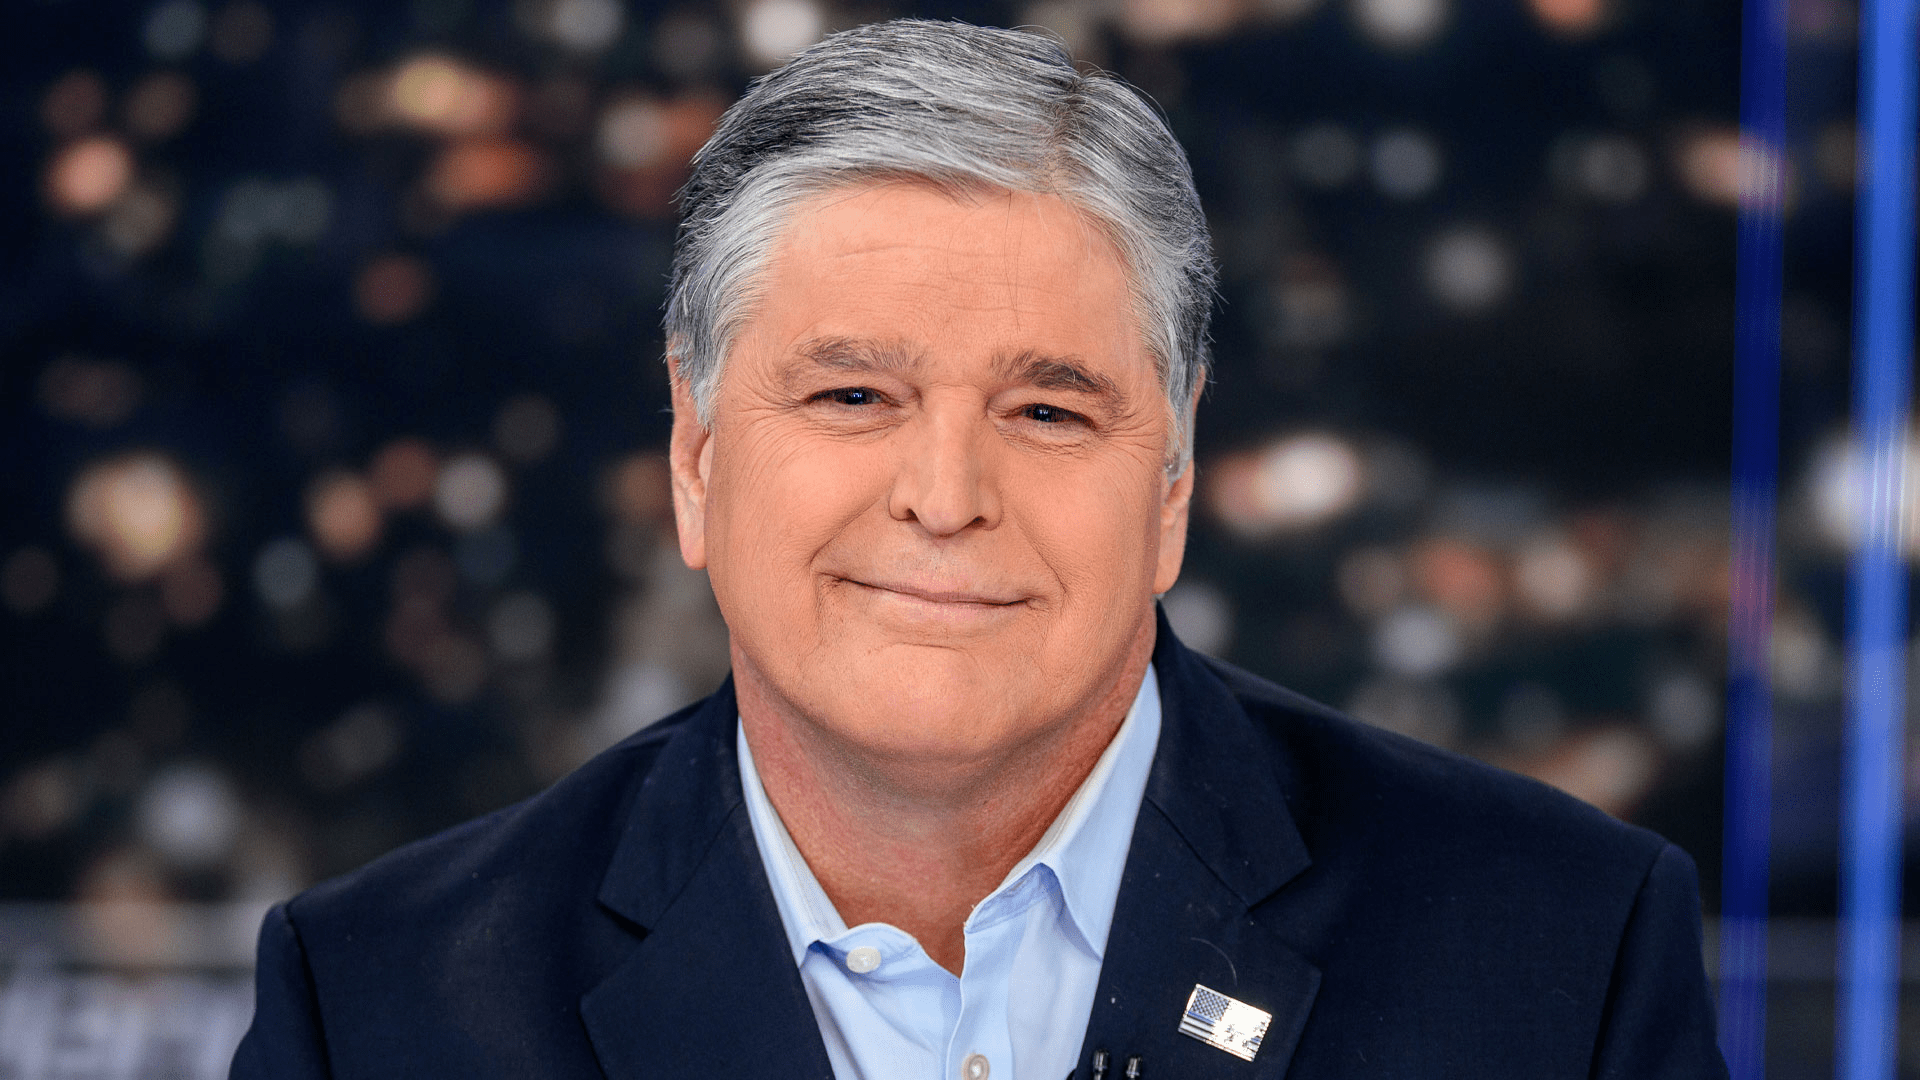 Sean Hannity Weight Loss What Is Sean Hannity’s Weight? TRAN HUNG